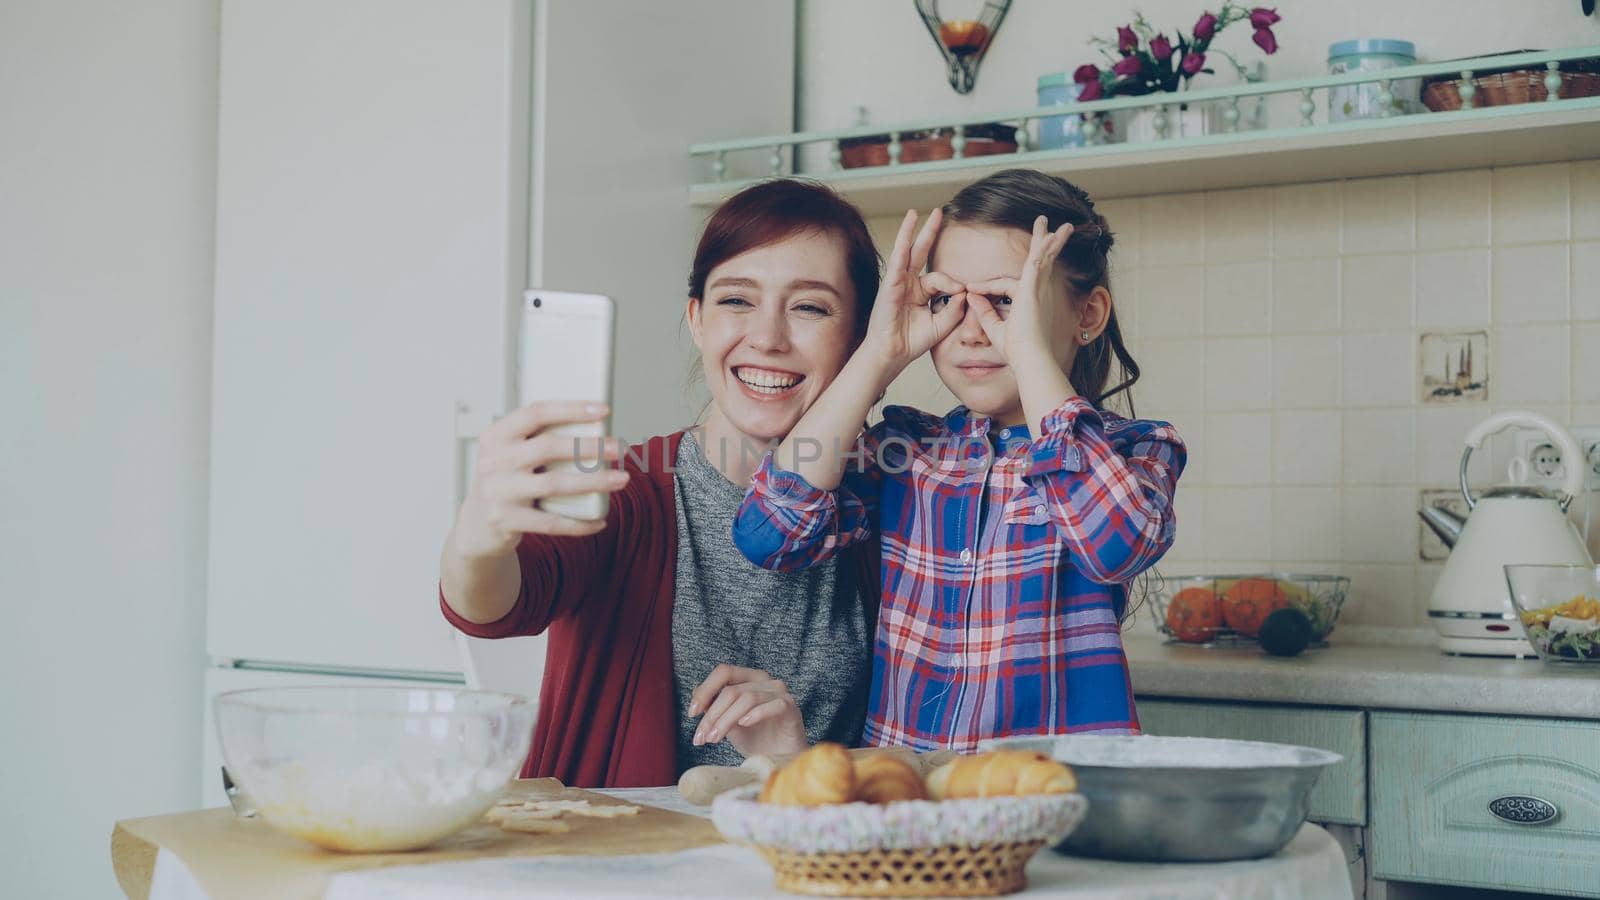 Smiling mother together with funny daughter taking selfie photo with smartphone camera making silly face while cooking at home in kitchen. Family, cook, and people concept by silverkblack